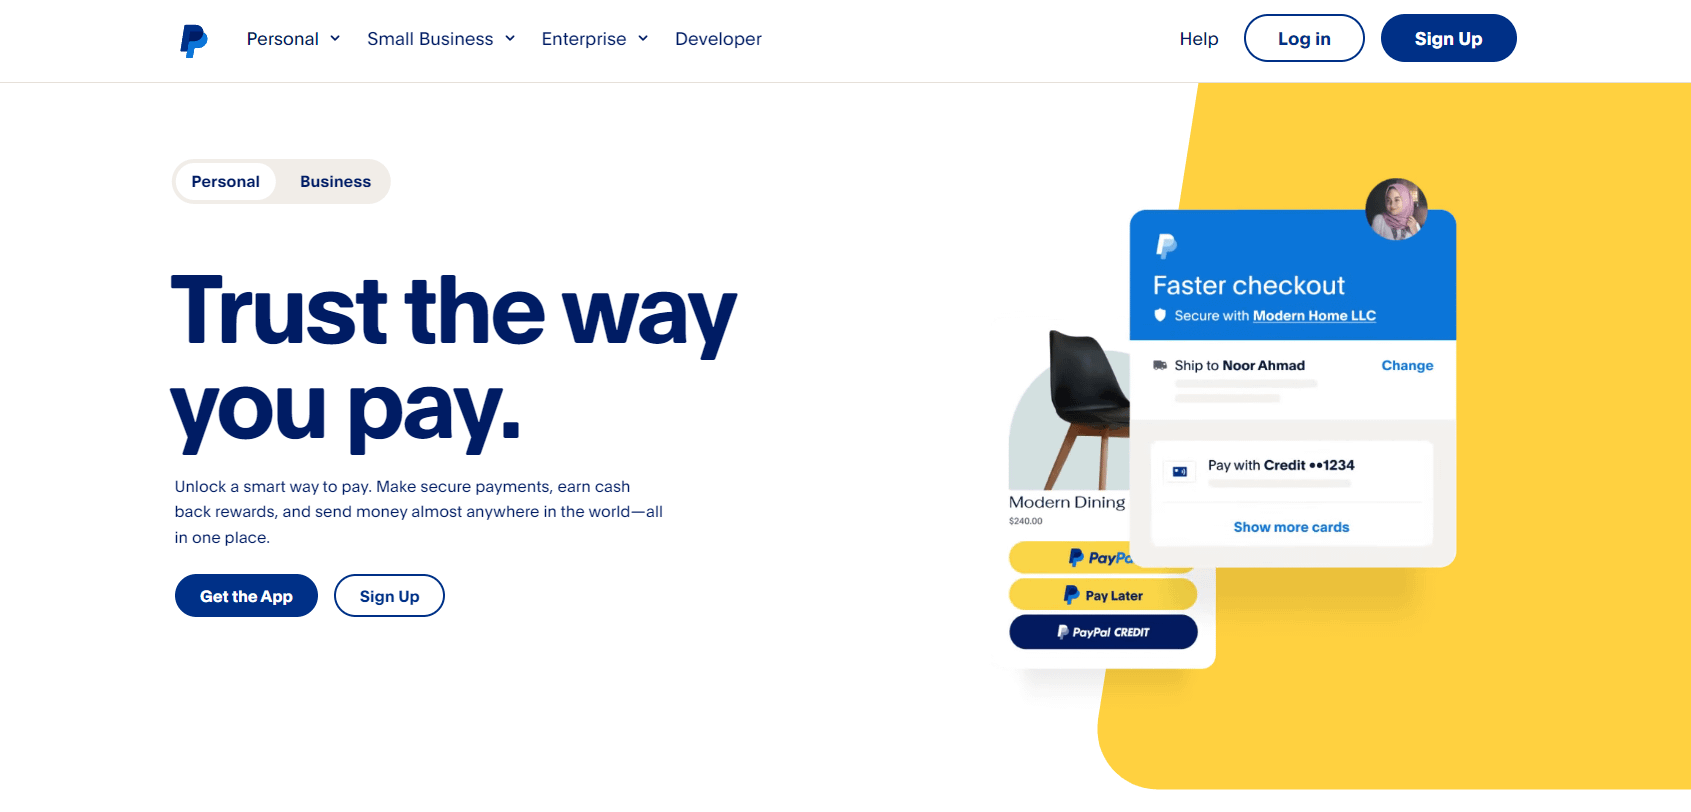 PayPal homepage